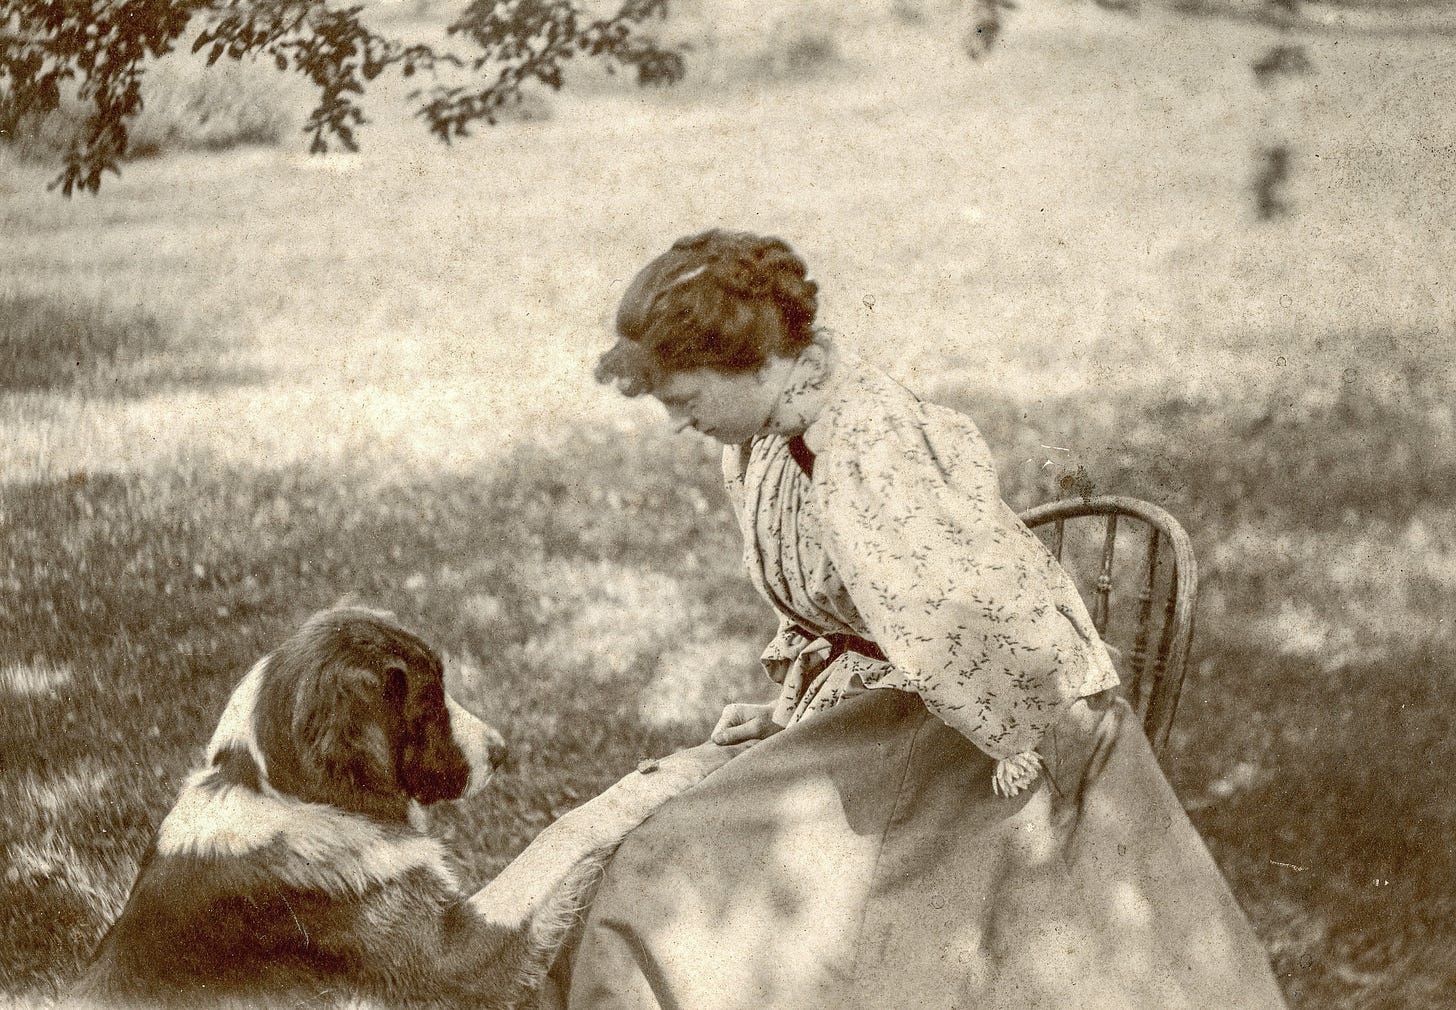 Mary and her dog